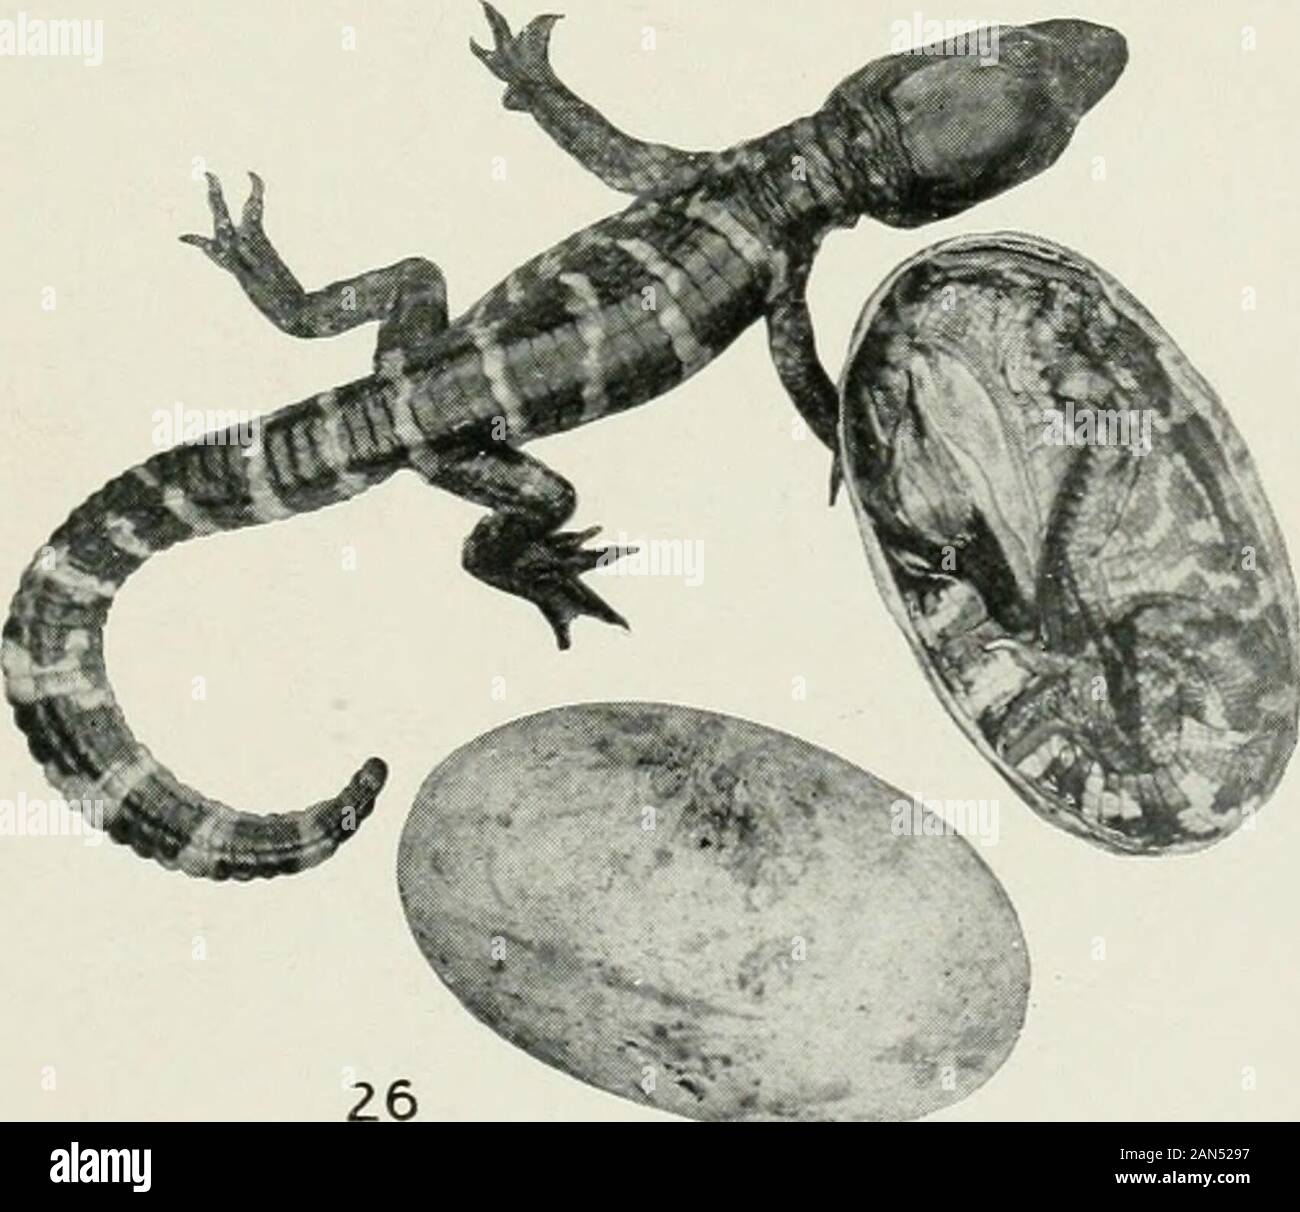 The alligator and its allies . Plate XXVIII. 25, Stage XXII, Alligator Embryo; 26, wStage XXIII, Alligator Just Hatched and Relative Size of Egg. 4 BIBLIOGRAPHY Adams, A. L., The Wanderings of a Naturalist in India. Edinburgh, 1867.Anderson, A., An Account of the Eggs and Young of the Gavial {G. gangeticus), Proc. Zool. Soc, 1875, p. 2. 3. Balfour, F. M., Comparative Embryology, vol. 2. 4. Battersby, J., Crocodiles Egg with Solid Shell, Nature, vol. 48, no. 1237, p. 248.BiscHOFF, tjber den Bau des Crocodilherzens, besonders von C. lucius, J. Miillers Archiv, 1836.BoAKE, Bancroft, The Nest of t Stock Photo